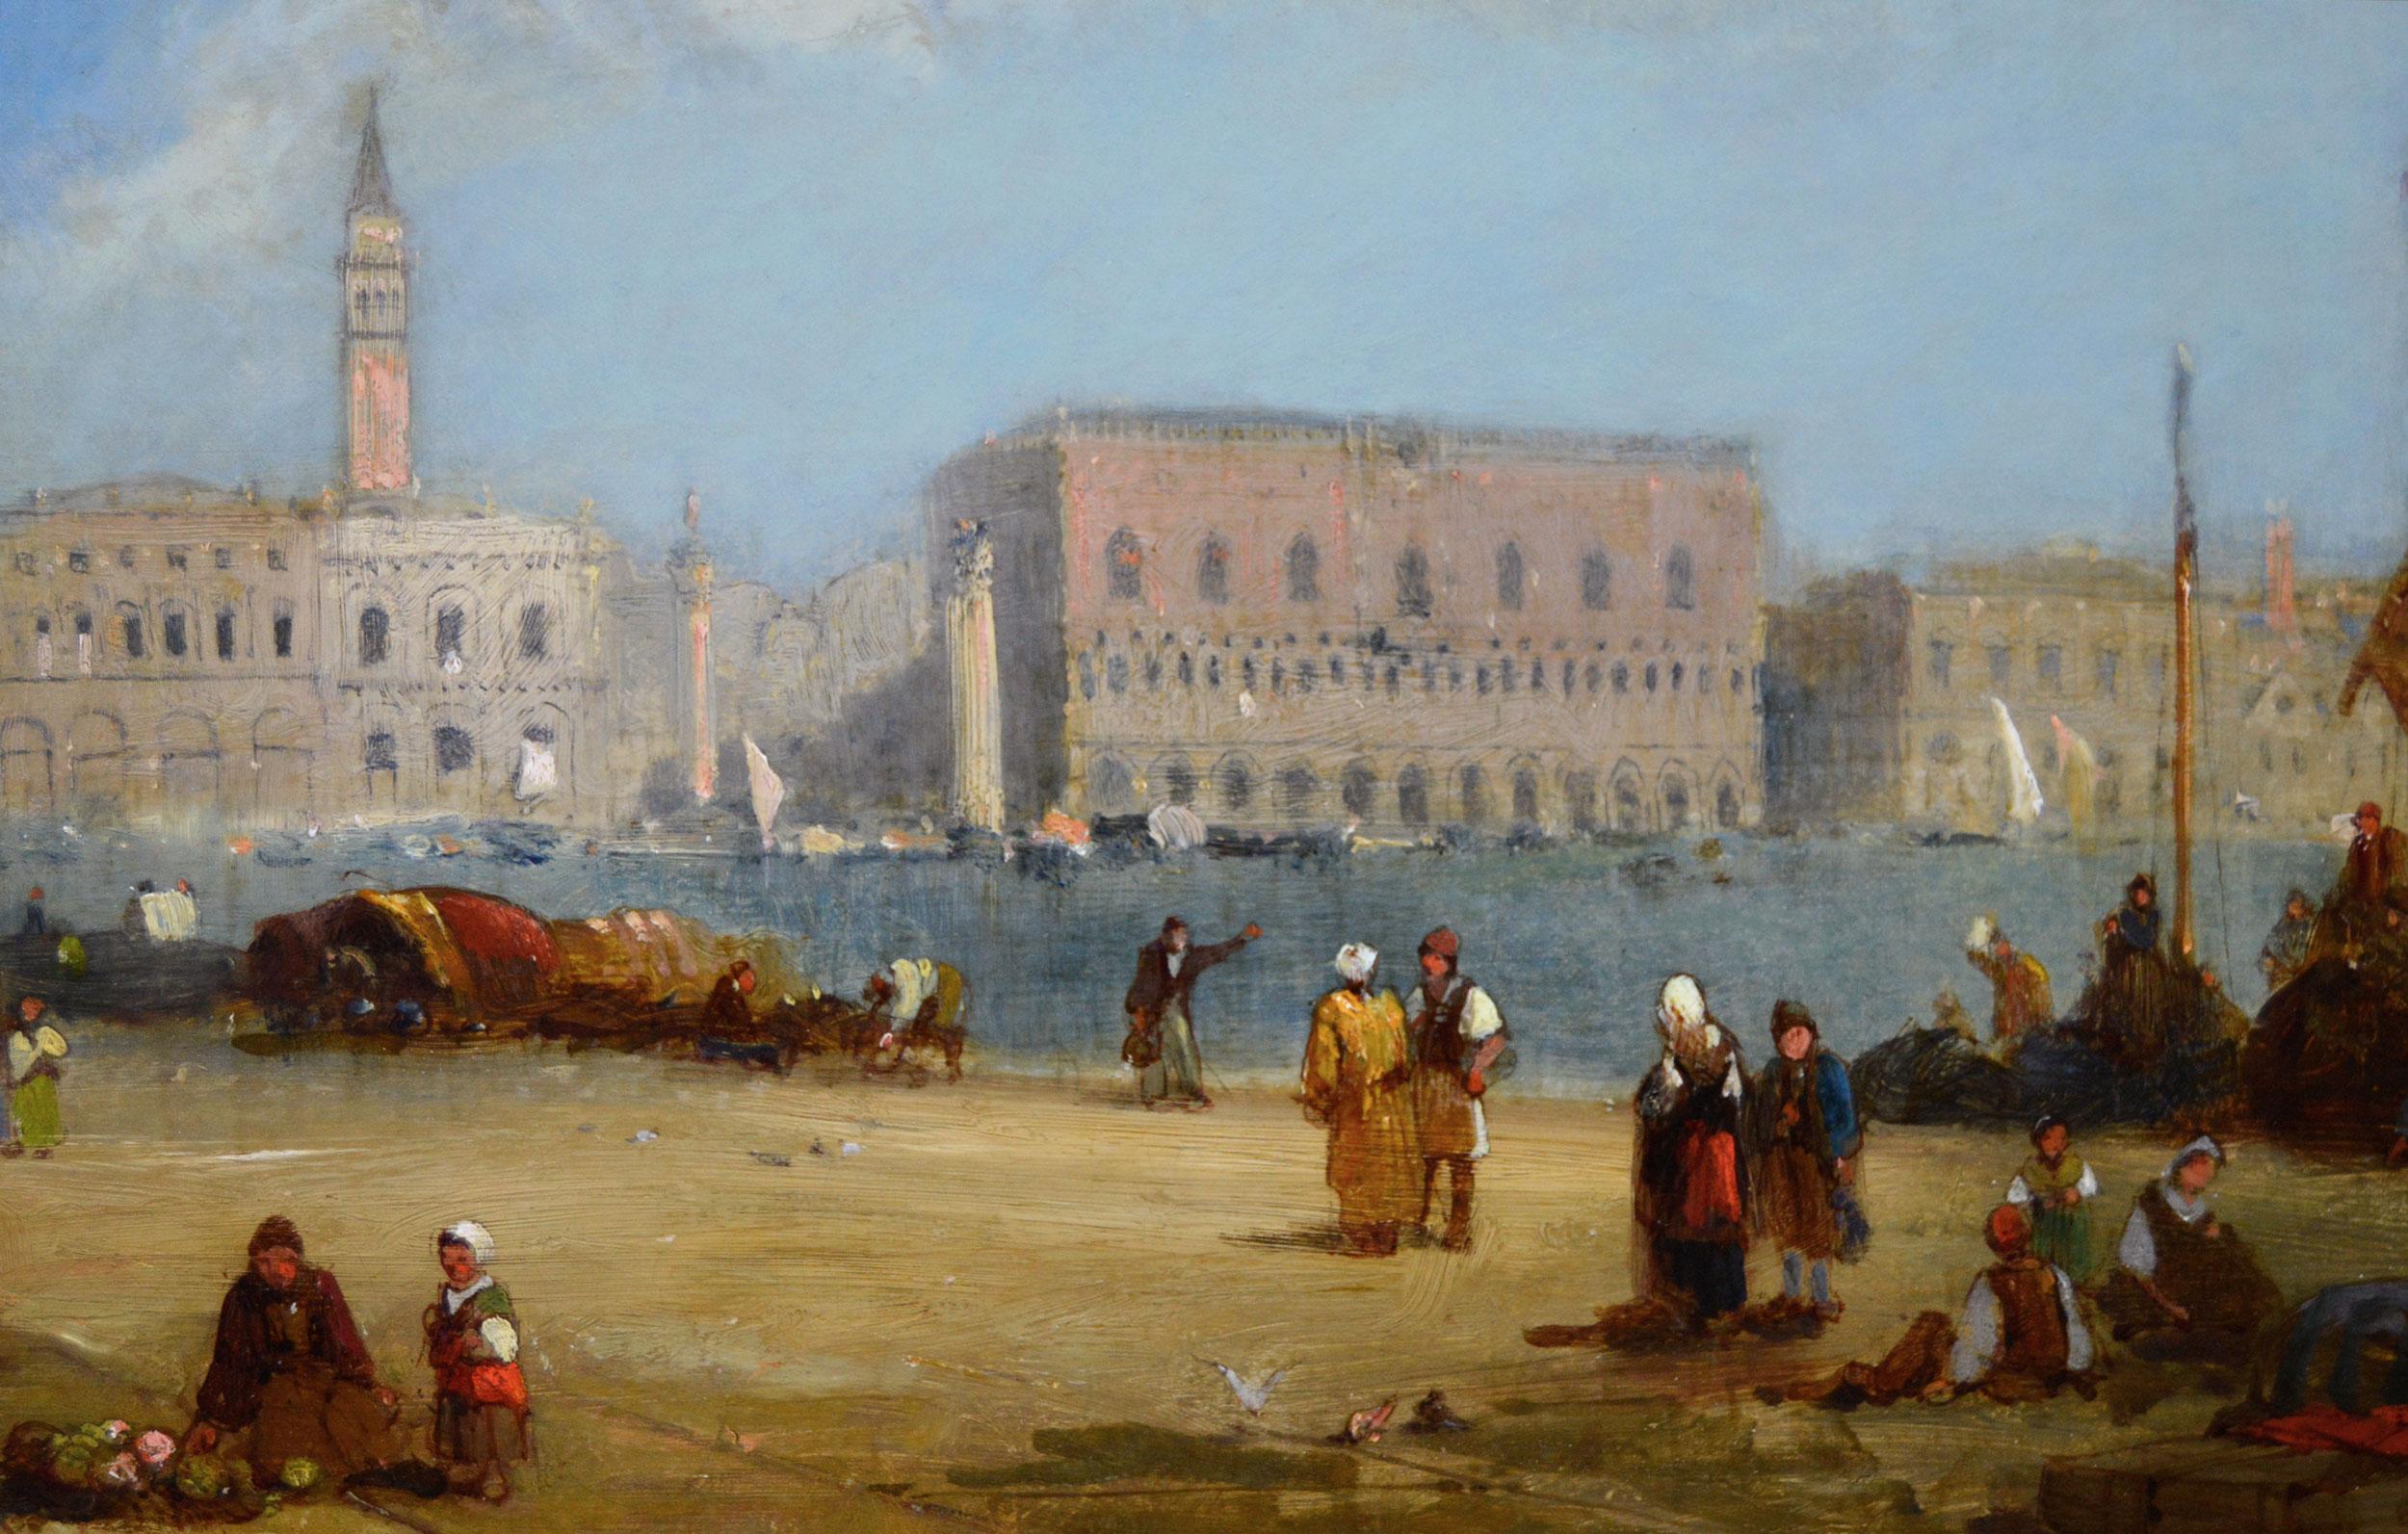 Jane Vivian
British, (fl. 1869-1890)
Looking towards the Doge’s palace from the Dogana
Oil on canvas, signed
Image size: 17.25 inches x 31.25 inches 
Size including frame: 22.75 inches x 36.75 inches

A wonderful painting of the Doge’s Palace and St